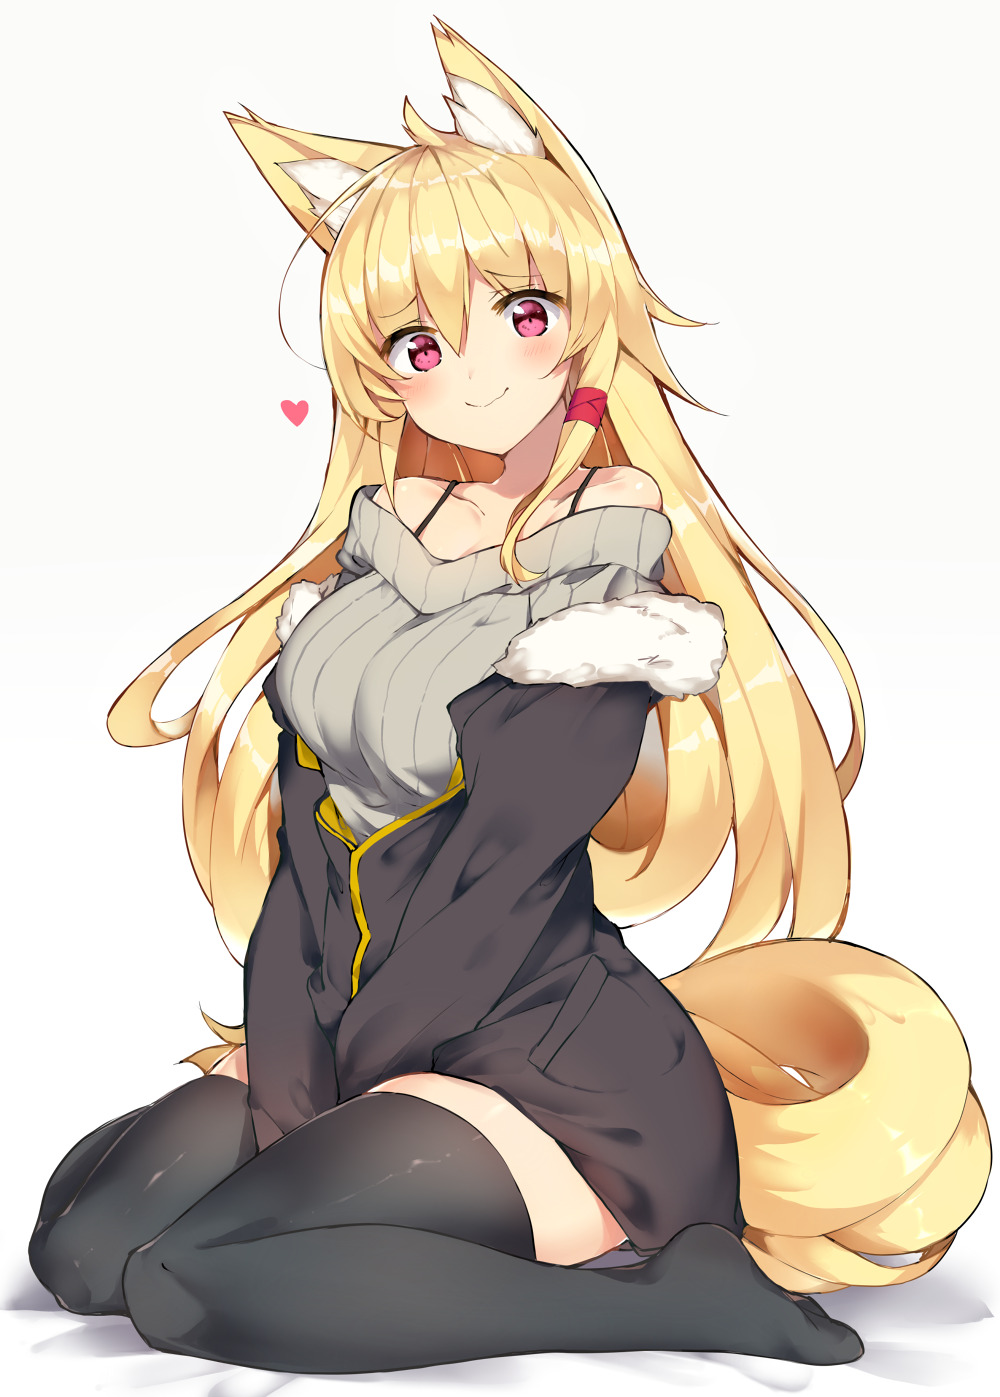 tail and ears with Anime fox girl